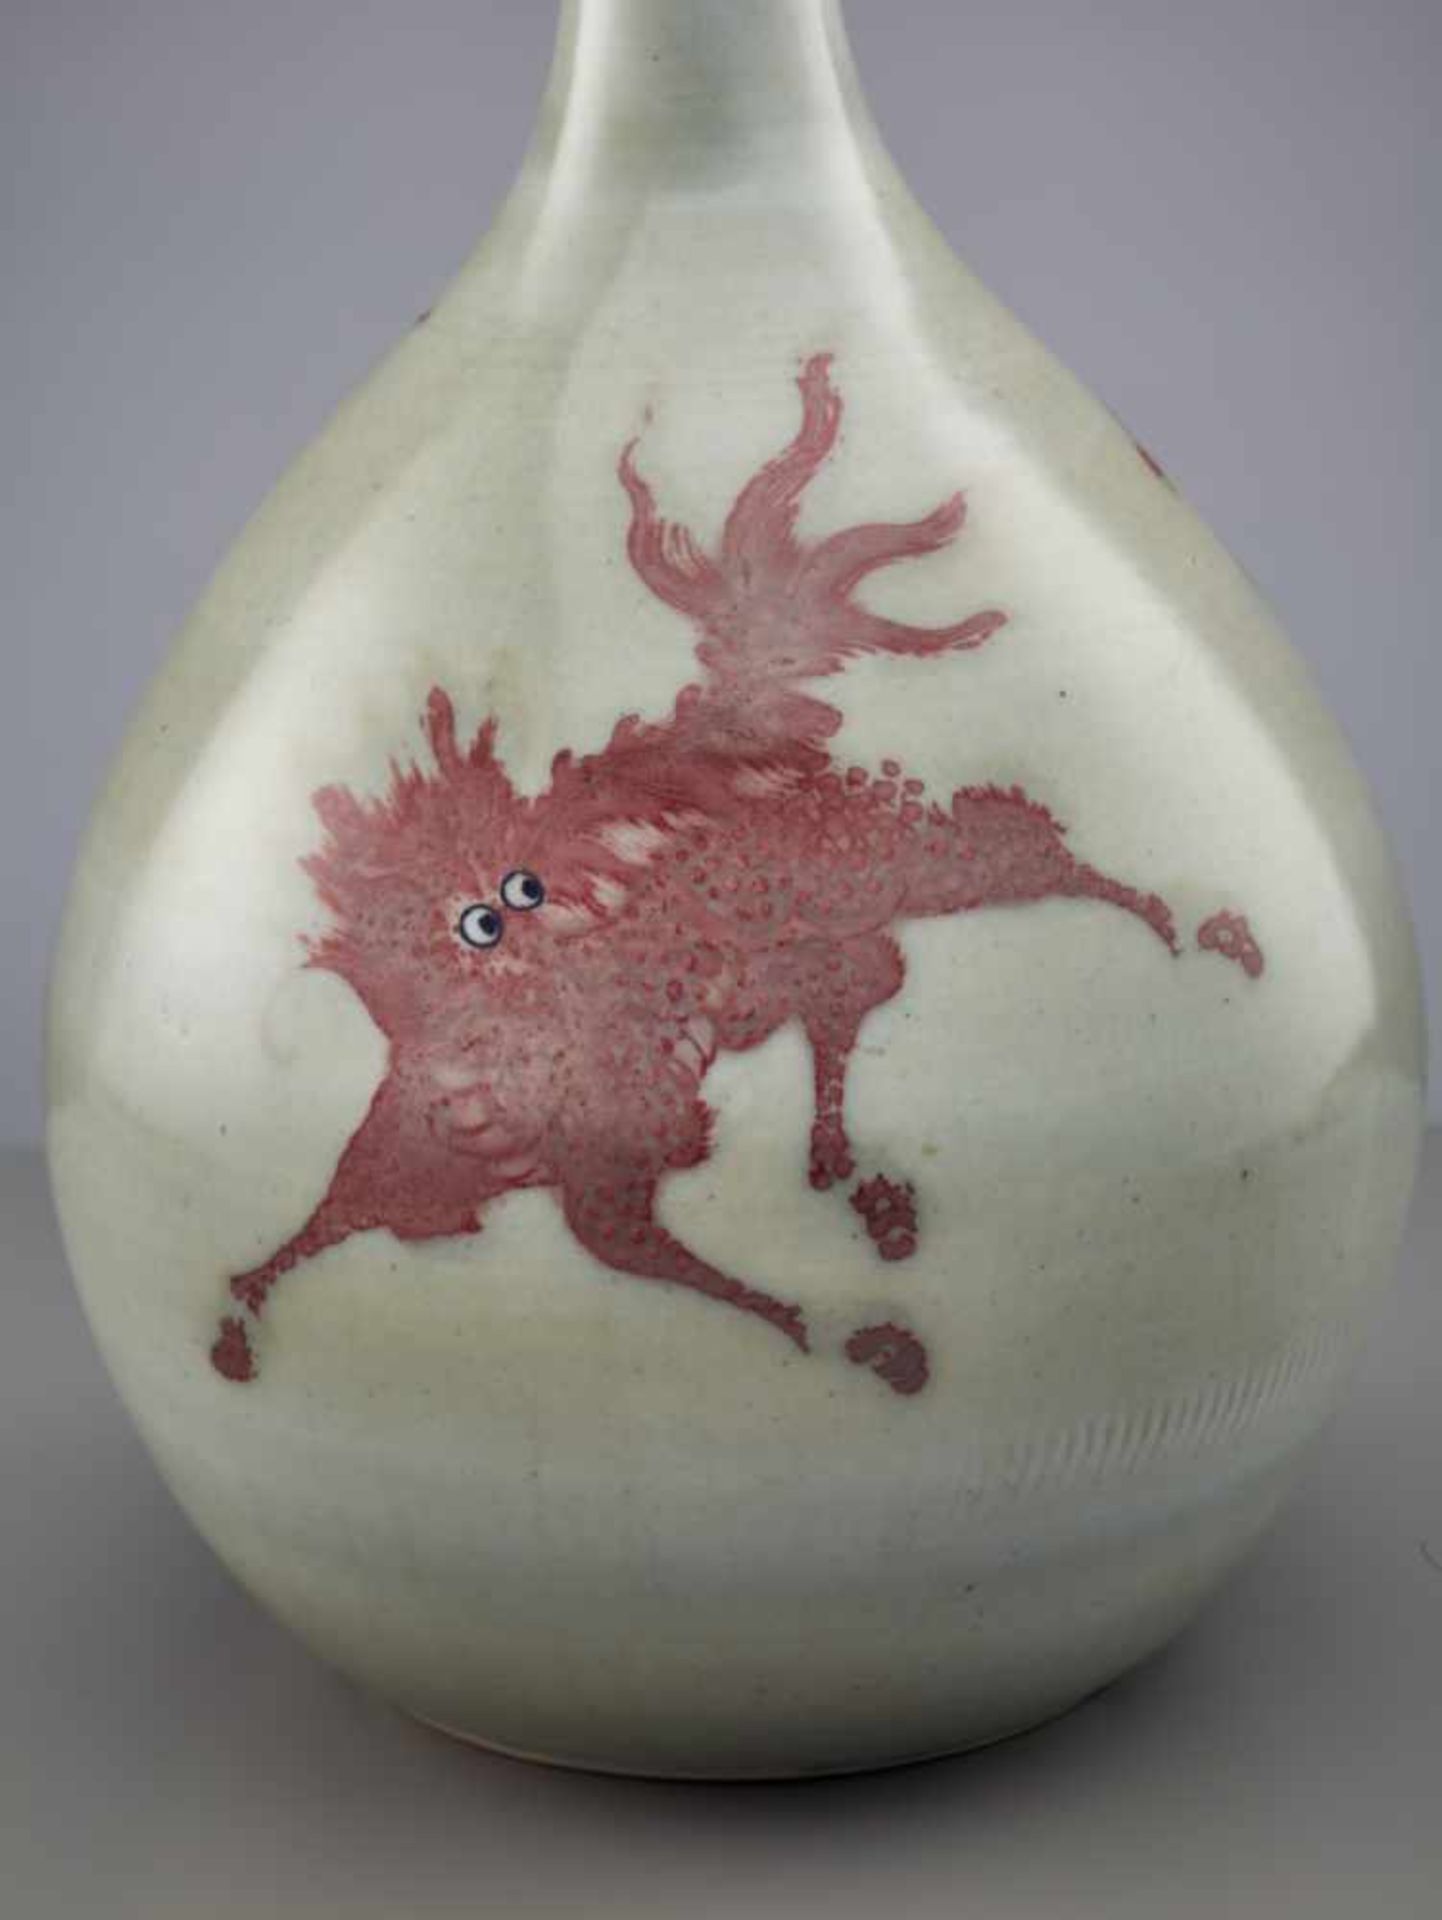 A VERY LARGE UNDERGLAZE COPPER-RED-DECORATED BOTTLE VASE, KANGXI PERIOD (1662-1722) Elegantly potted - Image 9 of 11